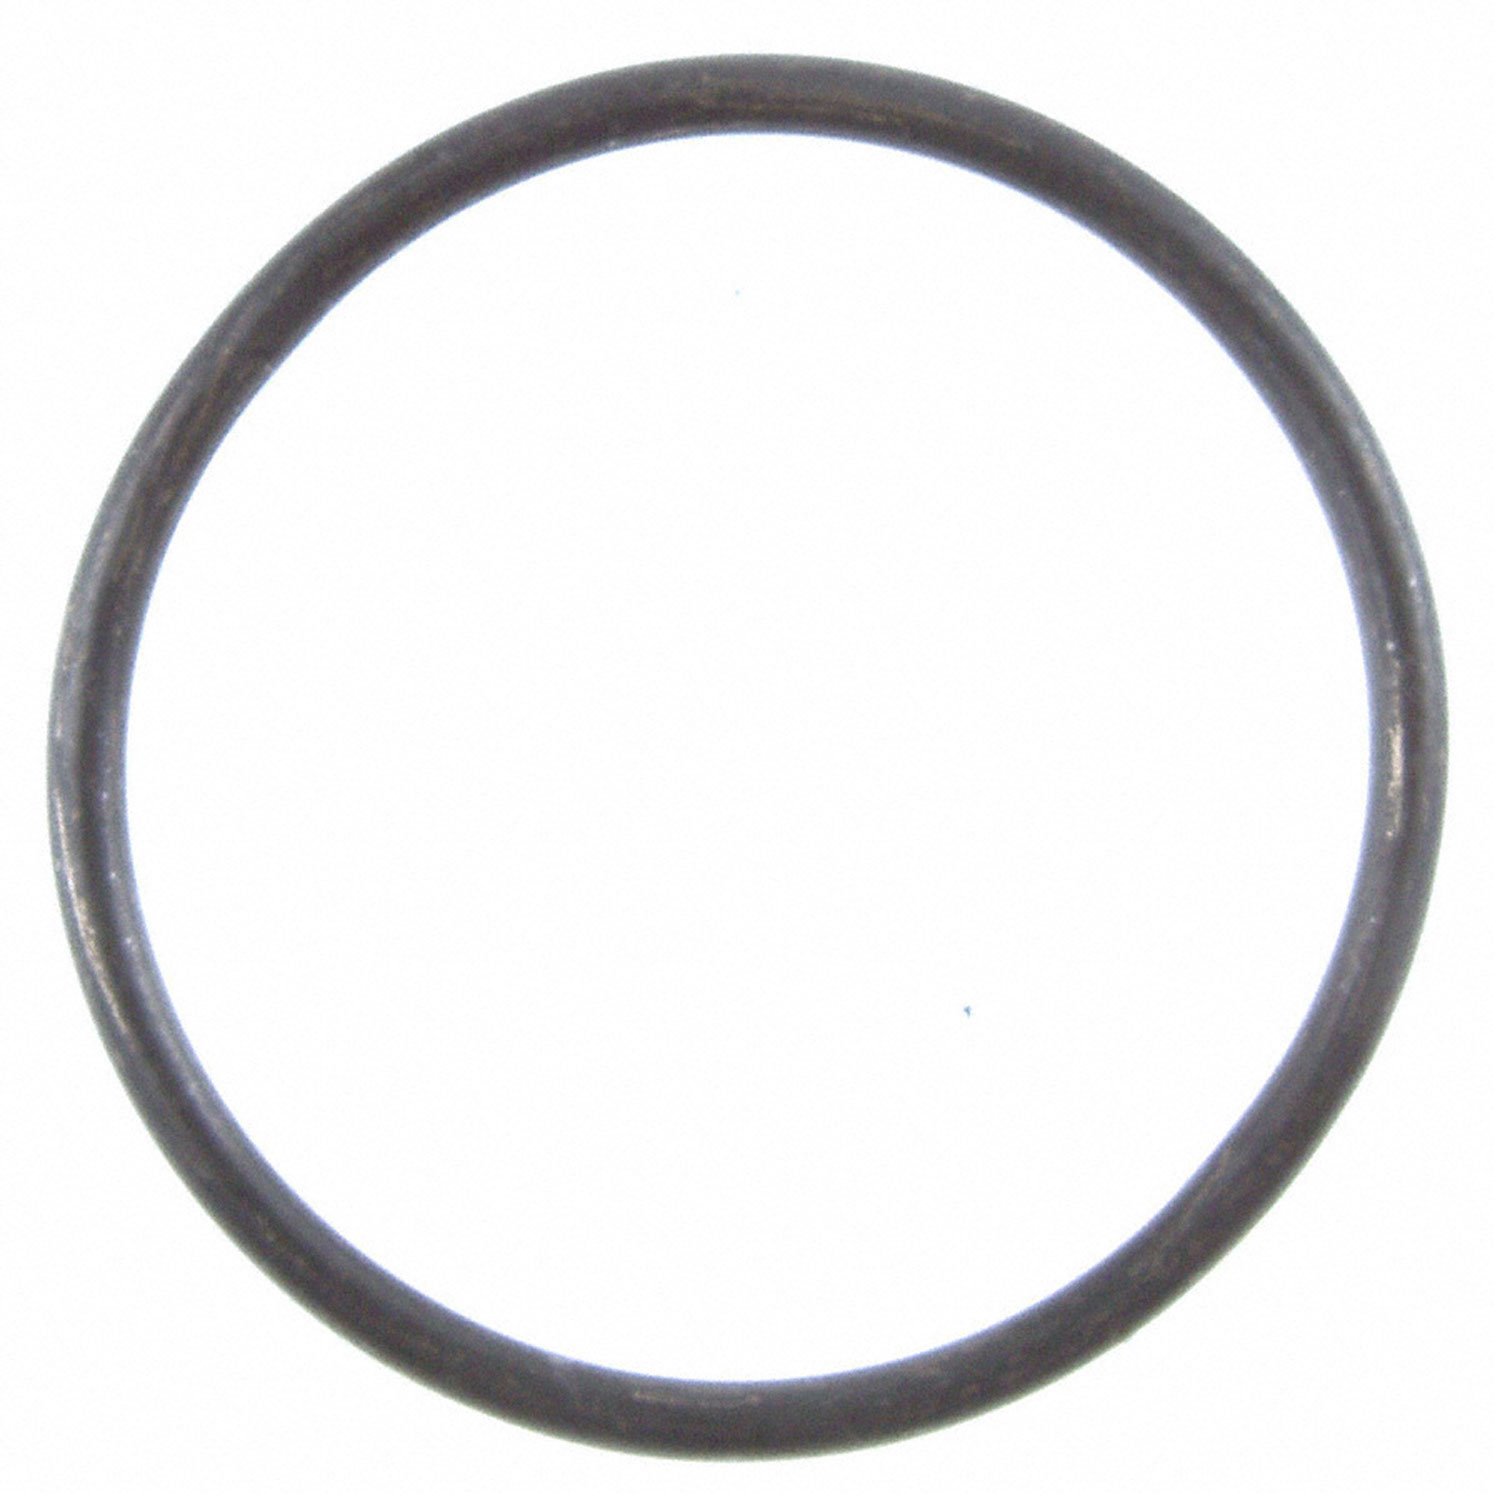 EXHAUST PIPE GASKET 2005-2002 FOR Car V6 183 3.0L DOHC Eng. 2002-05 Exhaust Pipe Ring